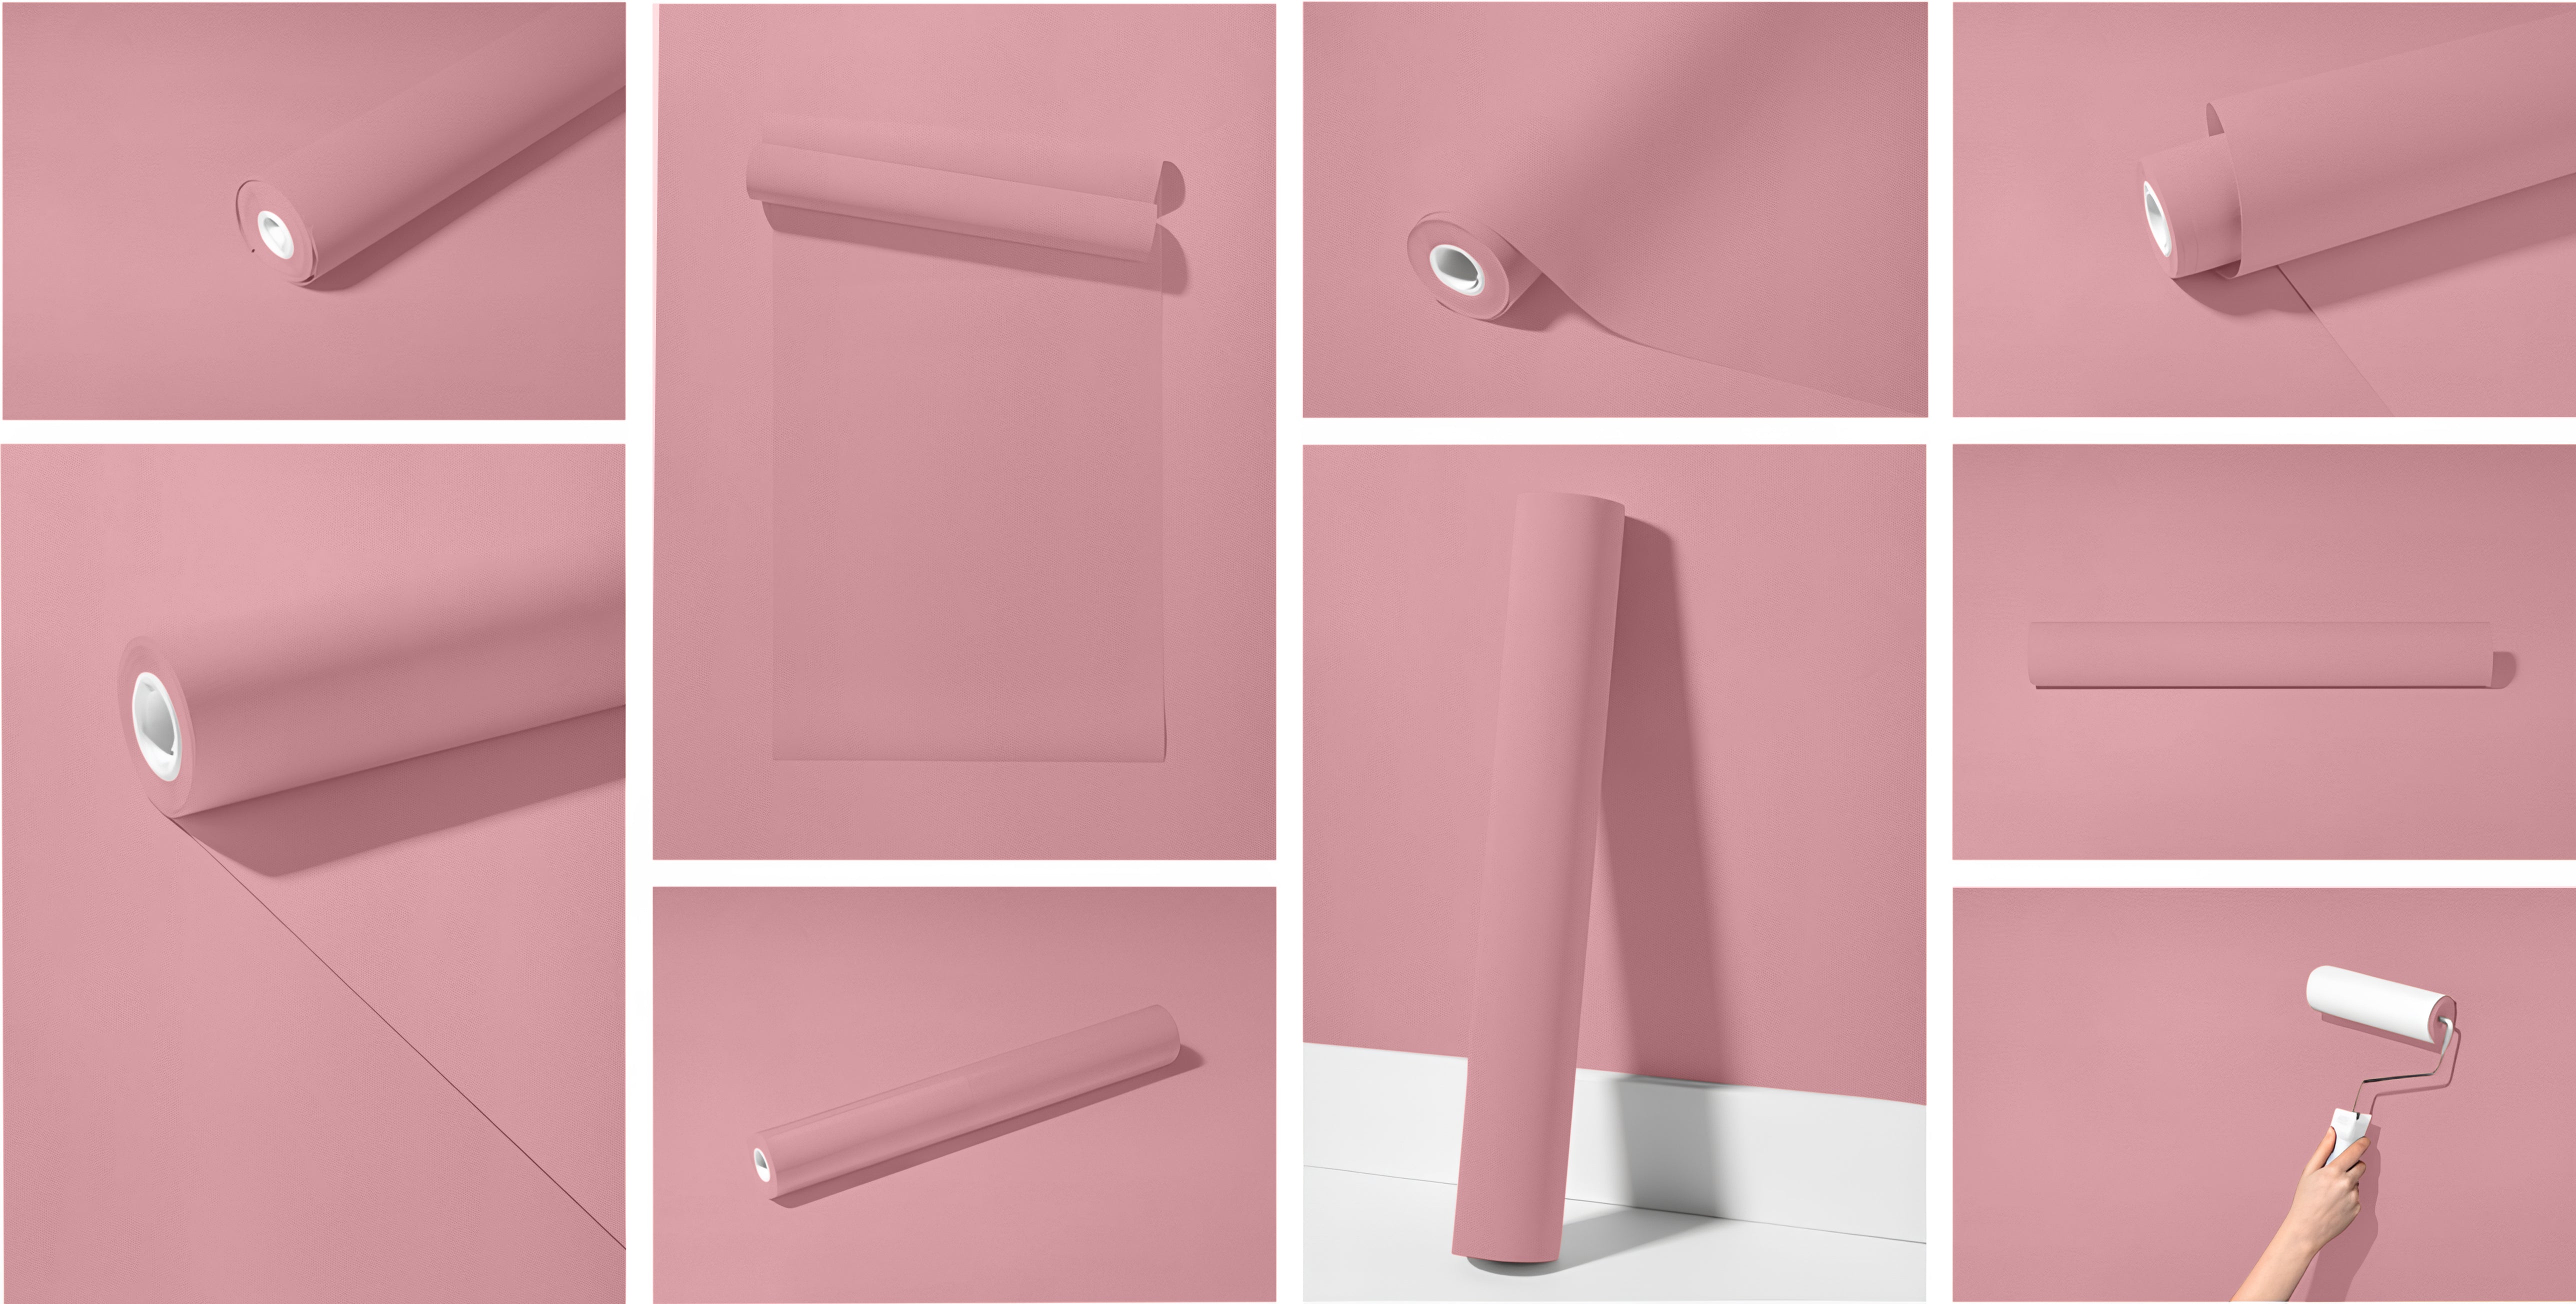 Peel & Stick Removable Re-usable Paint - Color RAL 3015 Light Pink - offRAL™ - RALRAW LLC, USA